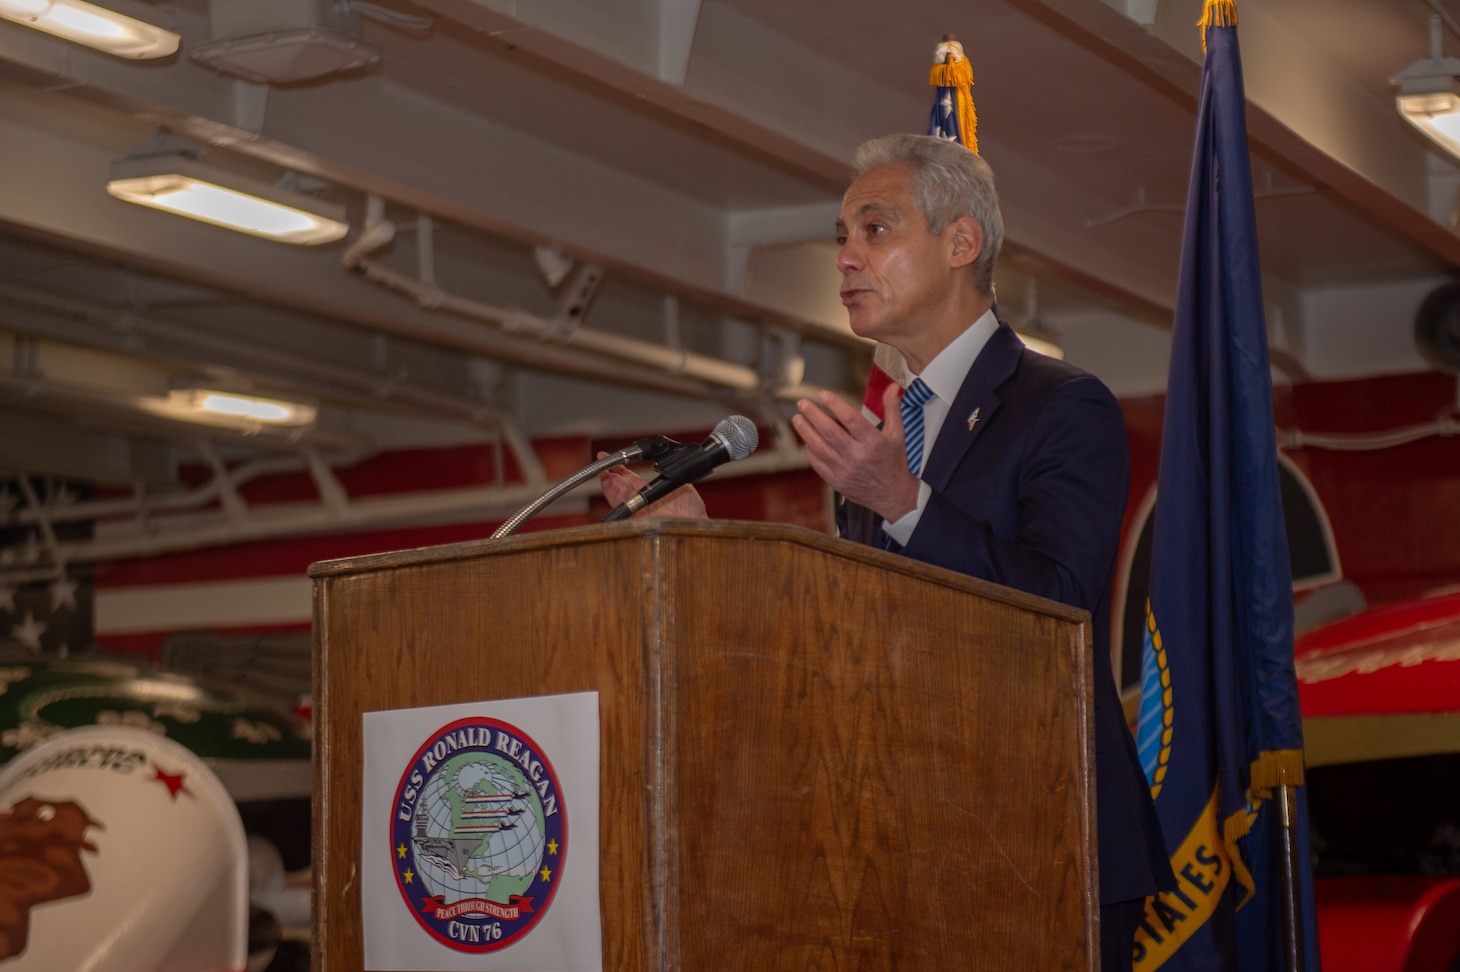 YOKOSUKA, Japan (Feb. 17, 2022) The Honorable Rahm Emanuel, the U.S. ambassador to Japan, gives remarks during a naturalization ceremony in the forecastle of the U.S. Navy’s only forward-deployed aircraft carrier USS Ronald Reagan (CVN 76). During the ceremony, 17 candidates from 11 different countries became American citizens and Emanuel served as the keynote speaker. Ronald Reagan, the flagship of Carrier Strike Group 5, provides a combat-ready force that protects and defends the United States, and supports alliances, partnerships and collective maritime interests in the Indo-Pacific region. (U.S. Navy photo by Mass Communication Specialist 3rd Class Daniel G. Providakes)